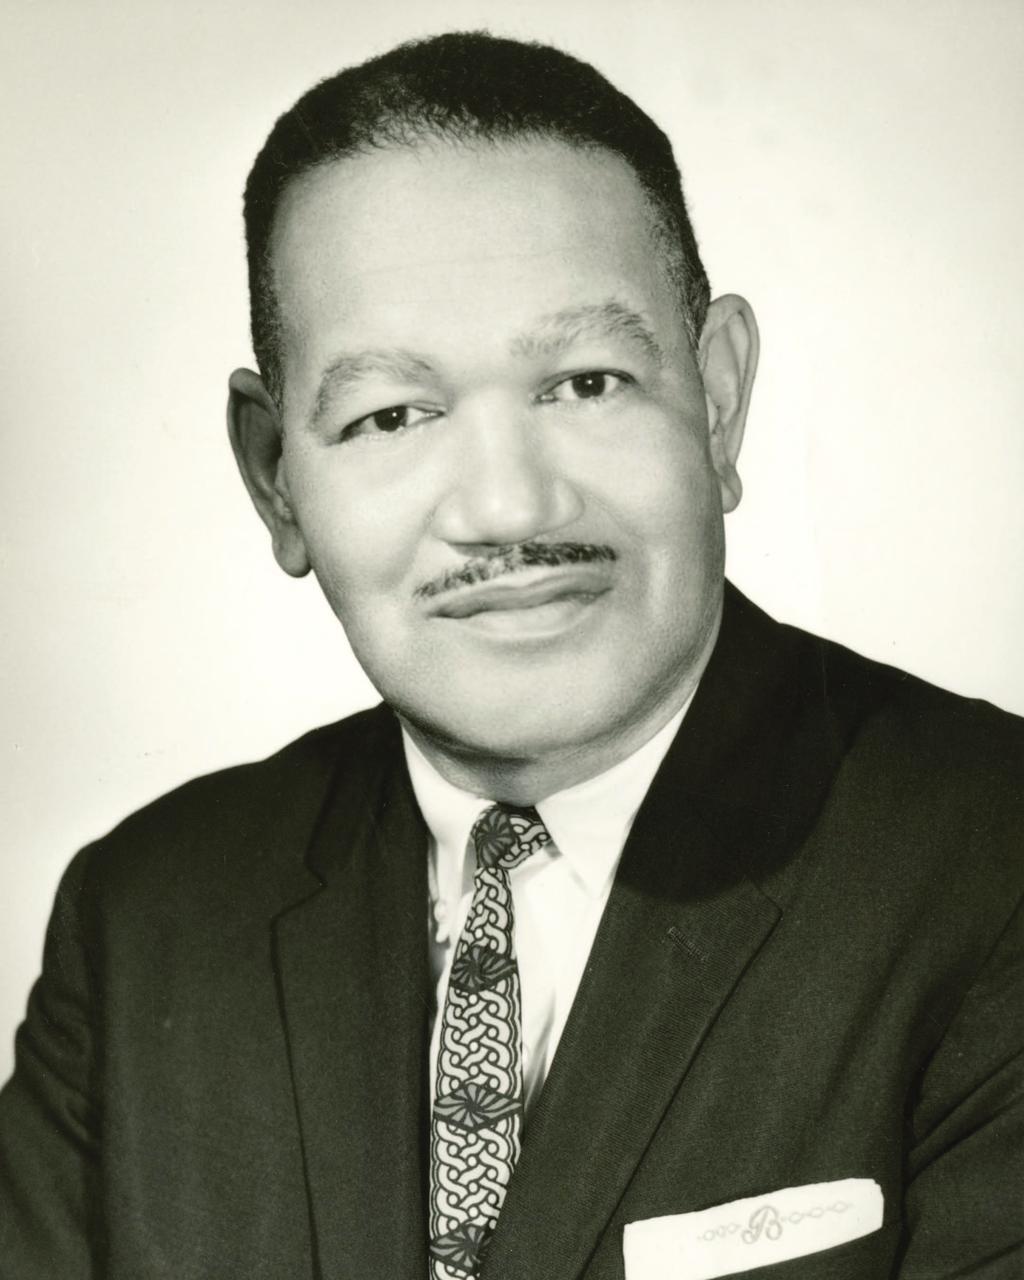 Dr. Girard T. Bryant 0 - Longtime teacher and administrator Girard T. Bryant was the first African American to serve as president of Penn Valley Community College in Kansas City, Missouri. Born in St.